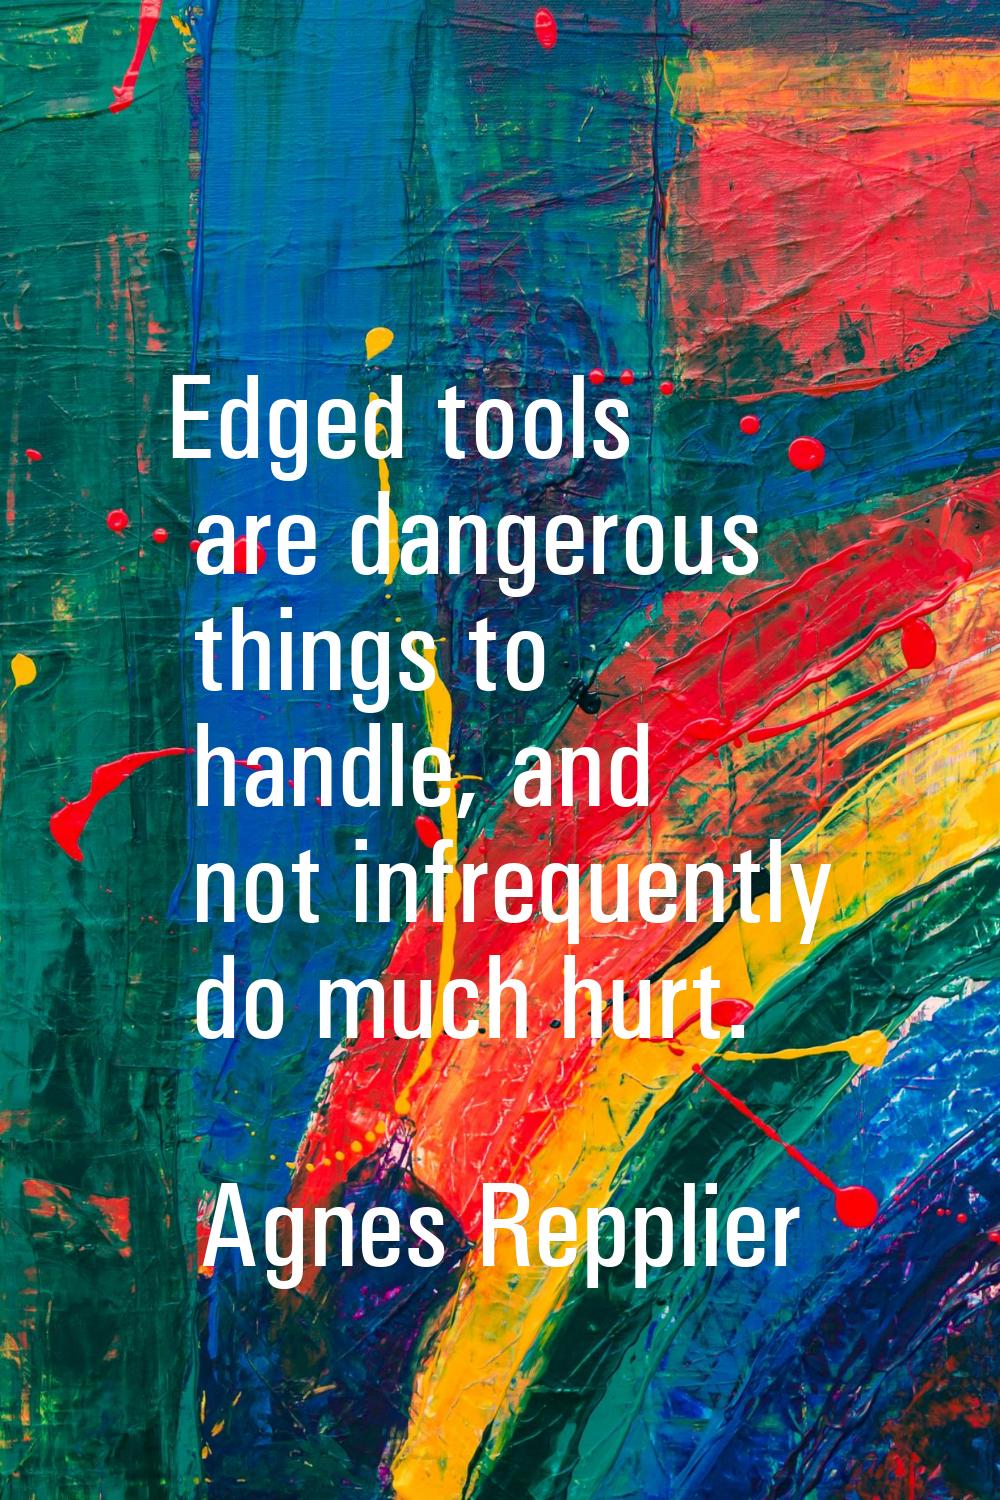 Edged tools are dangerous things to handle, and not infrequently do much hurt.